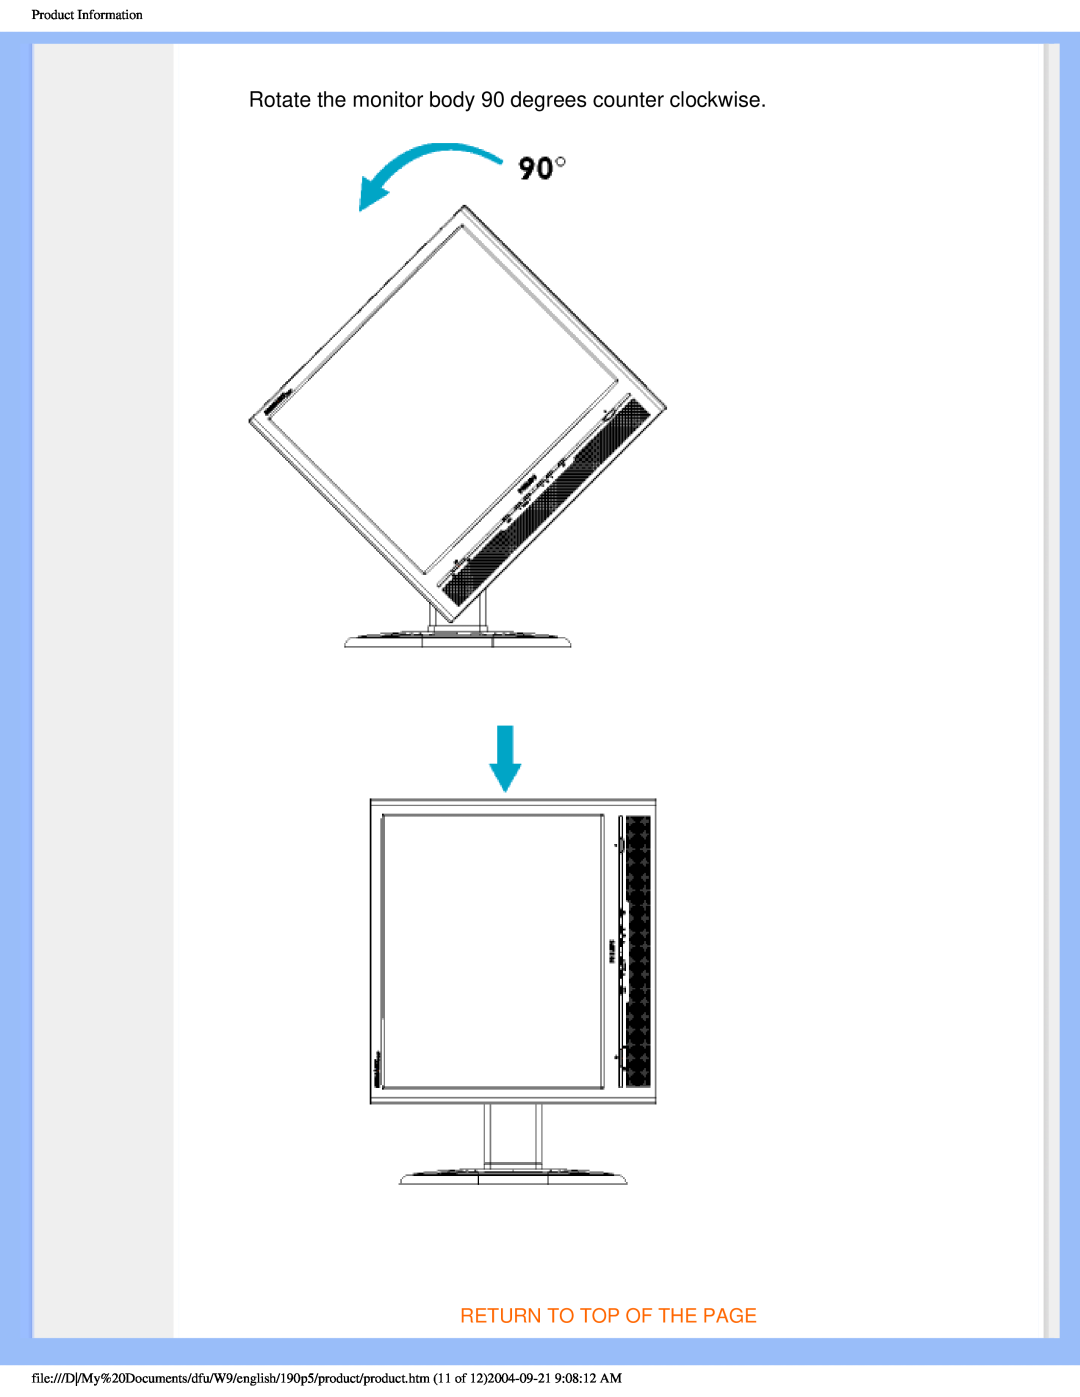 Philips 190PS Rotate the monitor body 90 degrees counter clockwise, Return To Top Of The Page, Product Information 